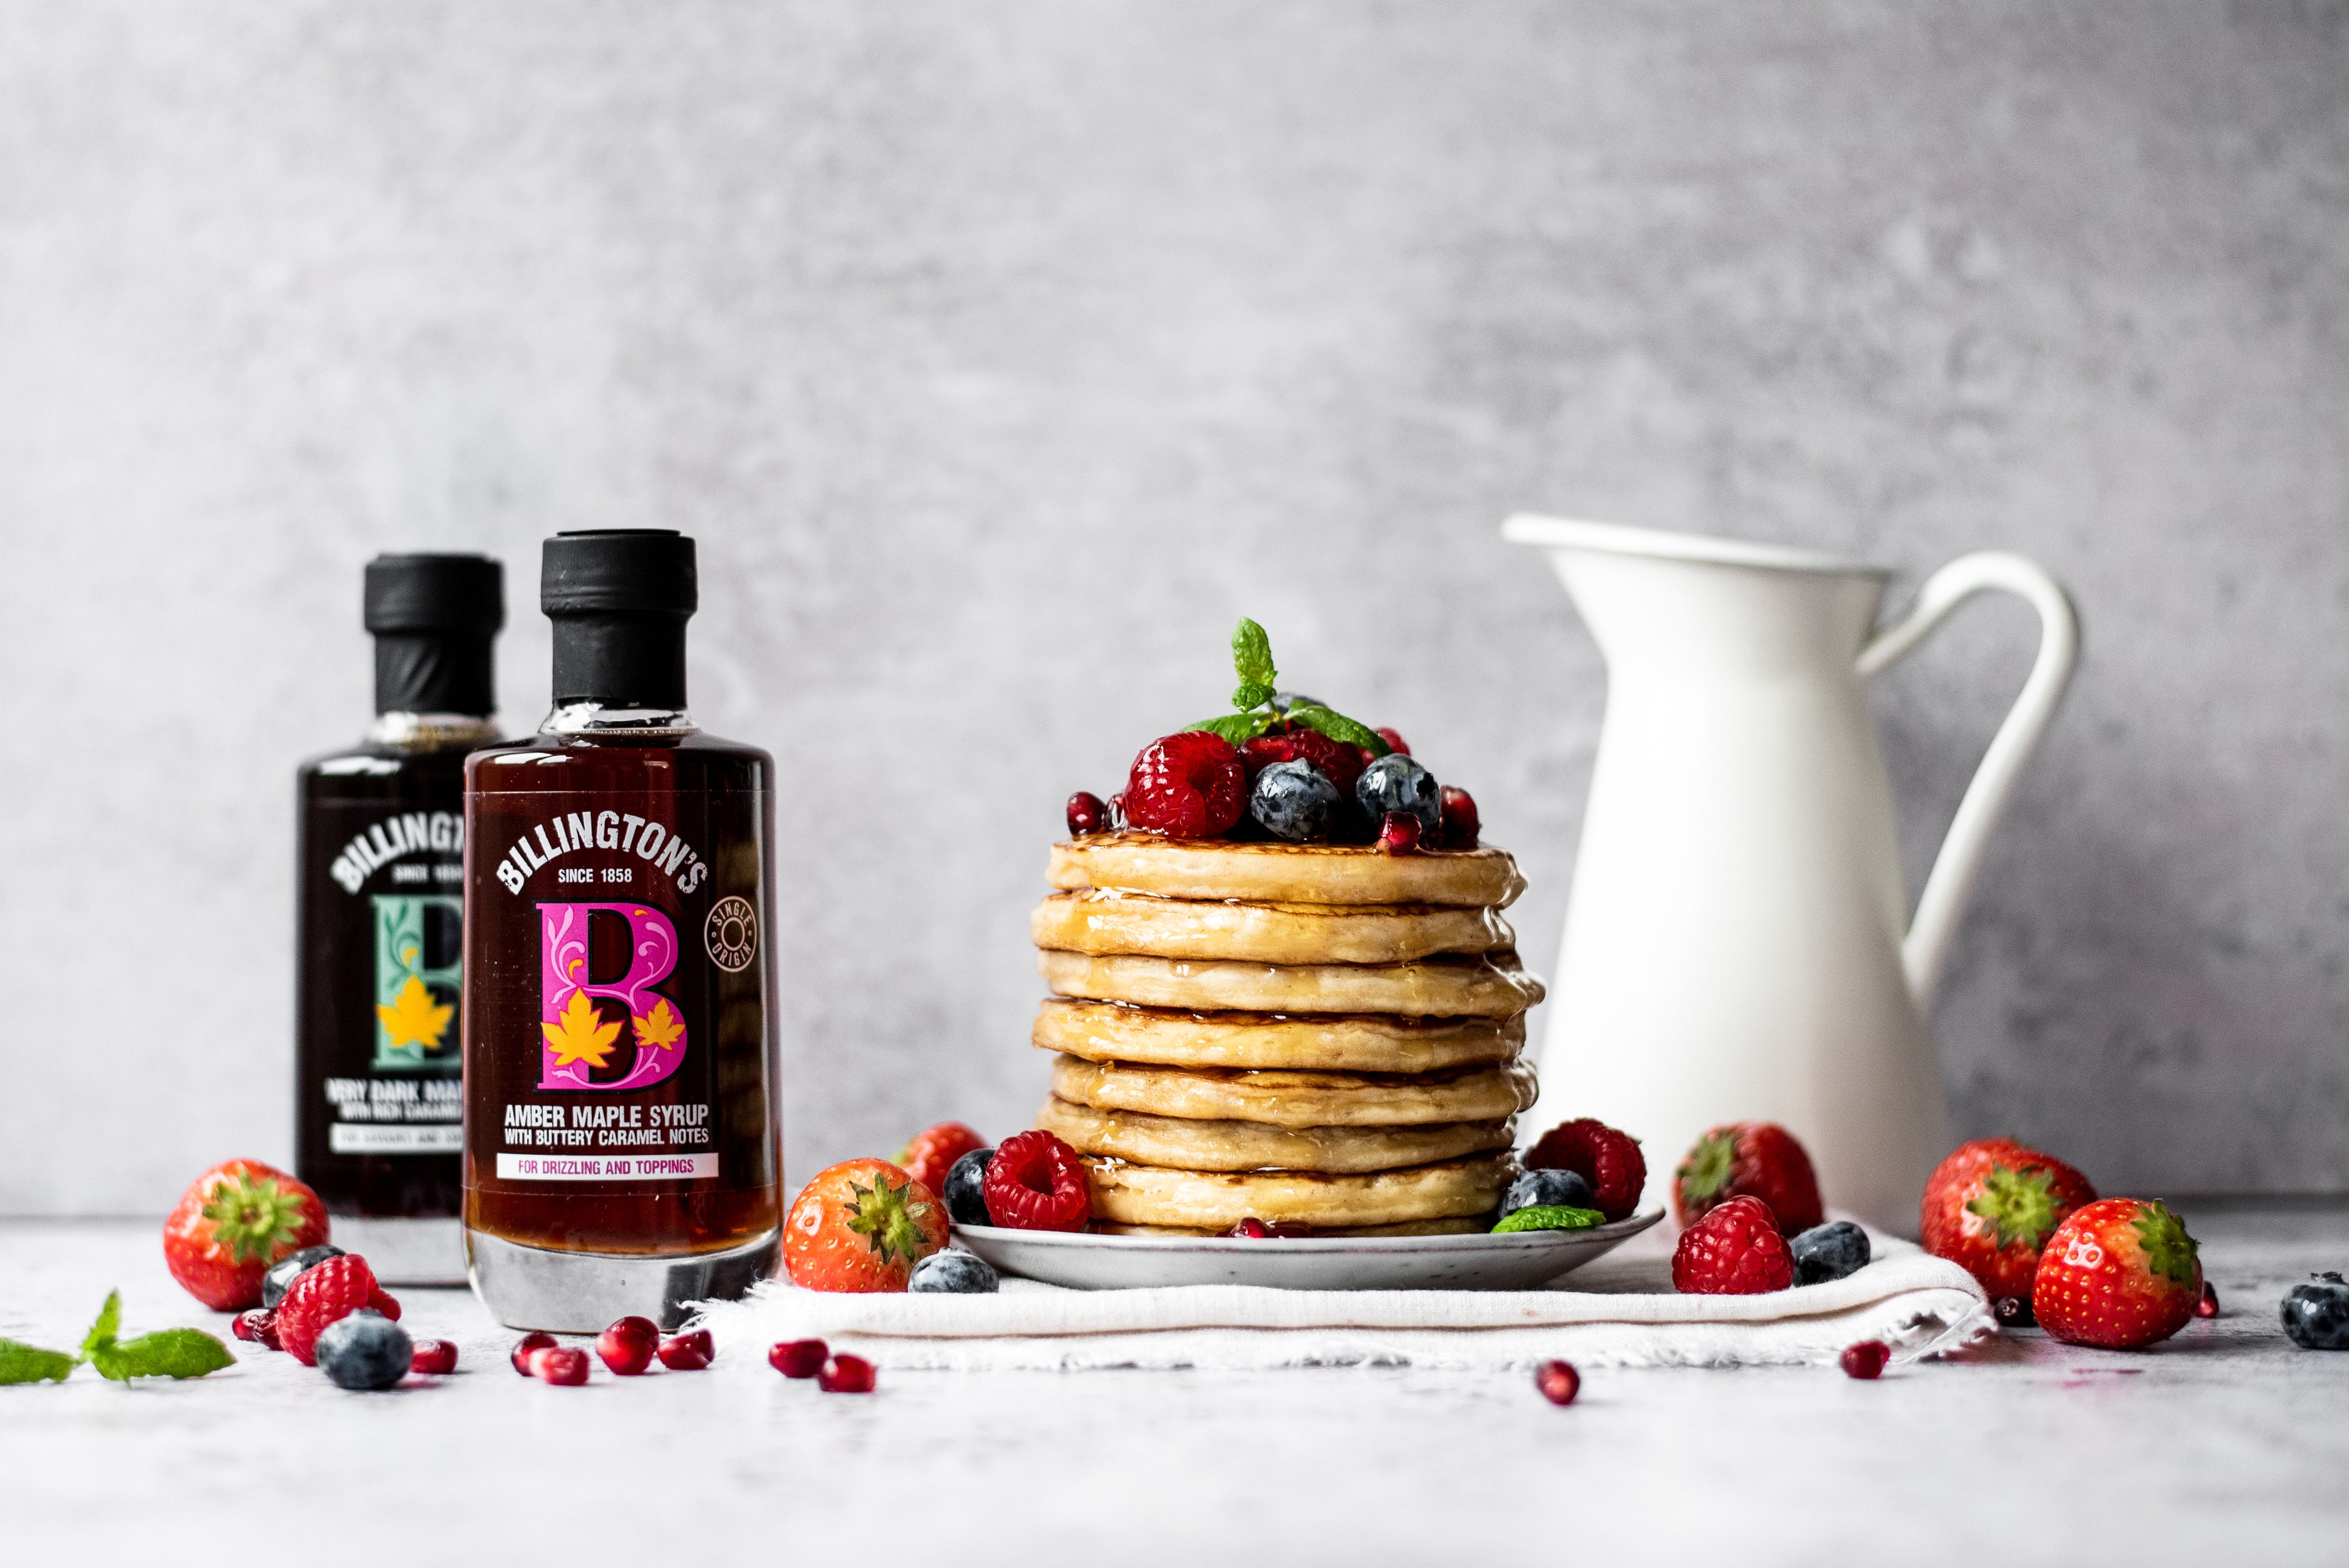 Stack of American-style pancakes topped with berries, next to two jars of maple syrup